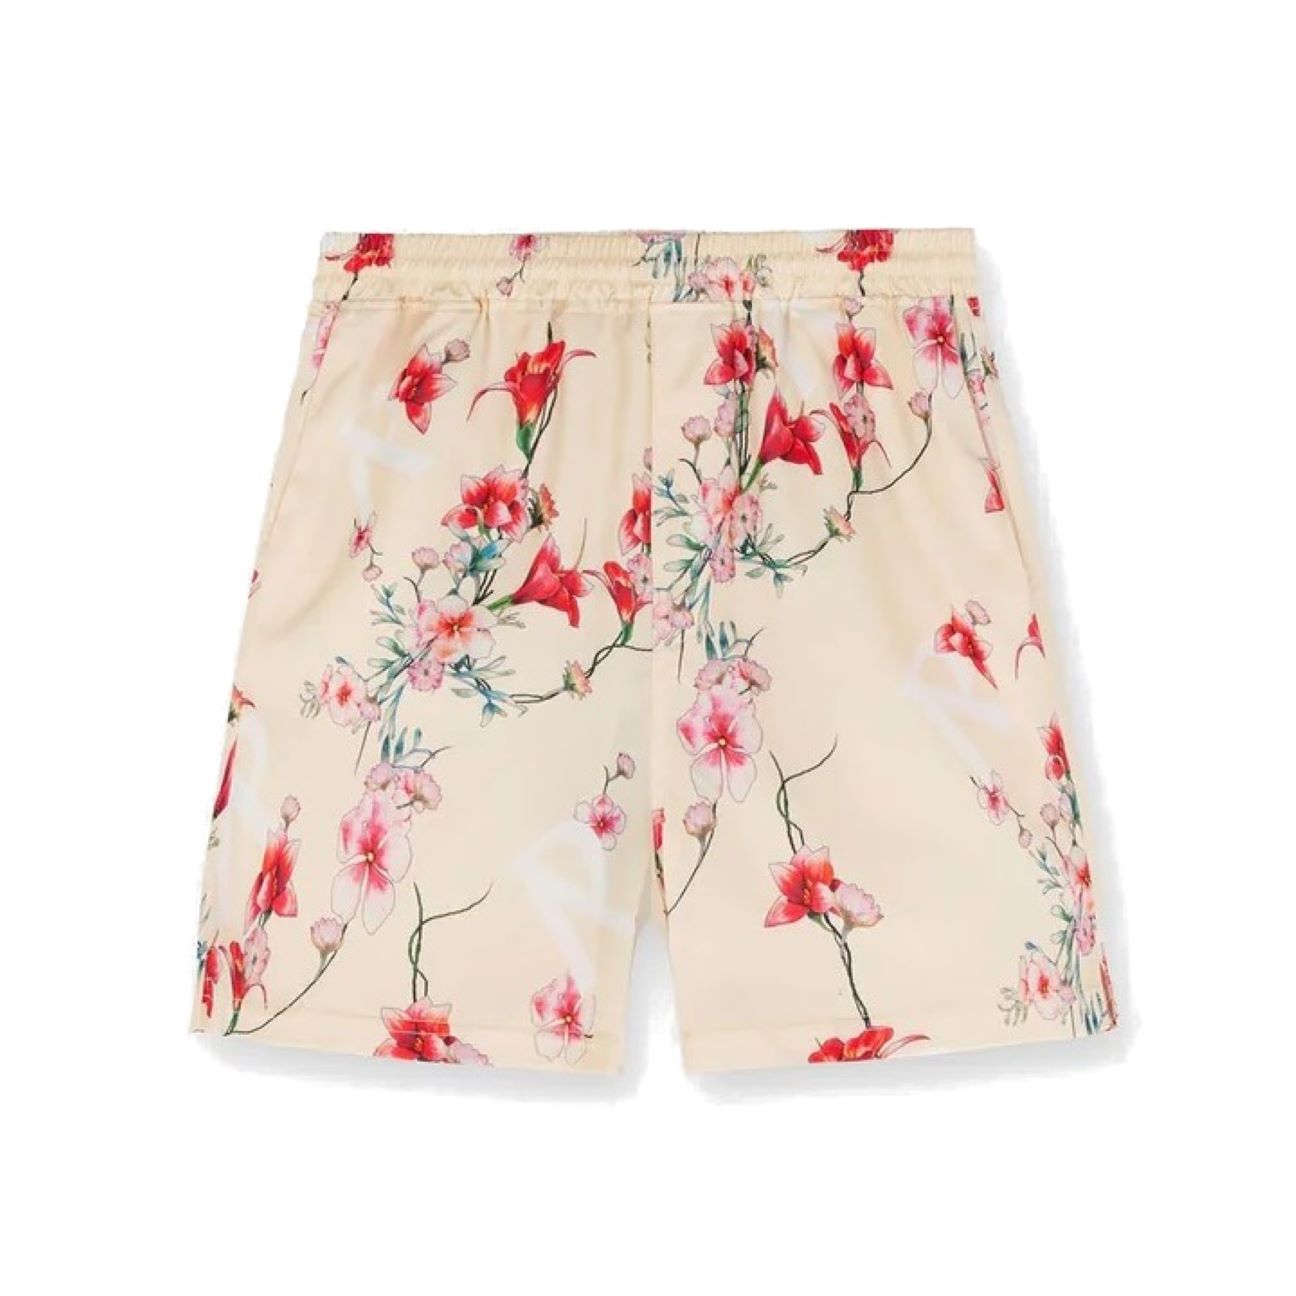 REPRESENT Floral Shorts in Creme